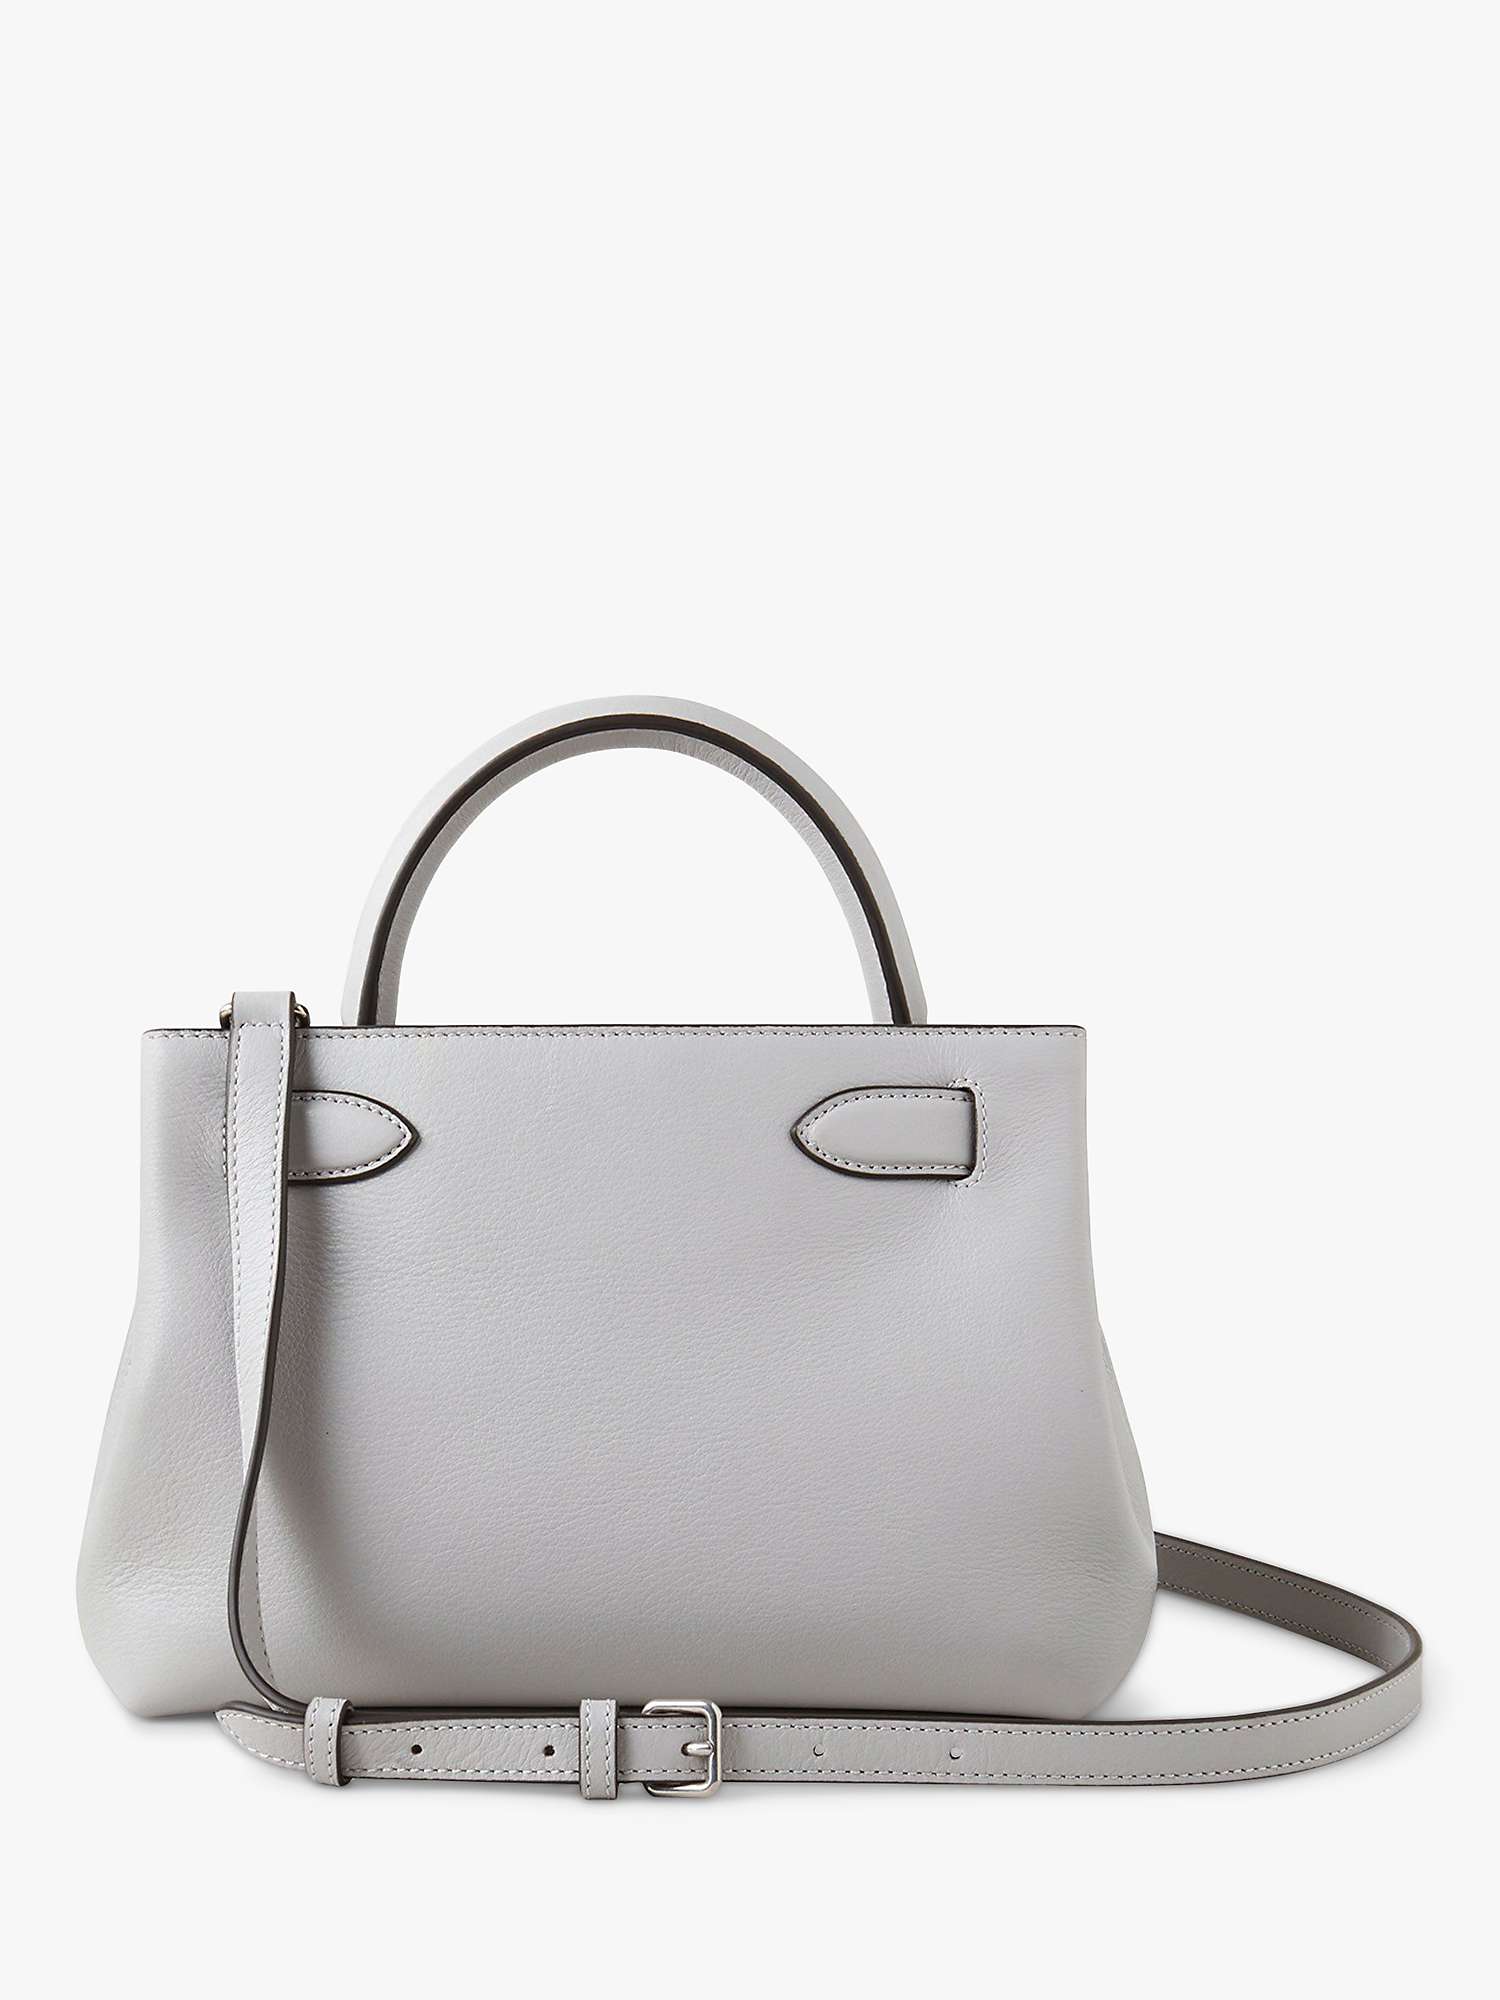 Buy Mulberry Small Islington Silky Calf Shoulder Bag Online at johnlewis.com